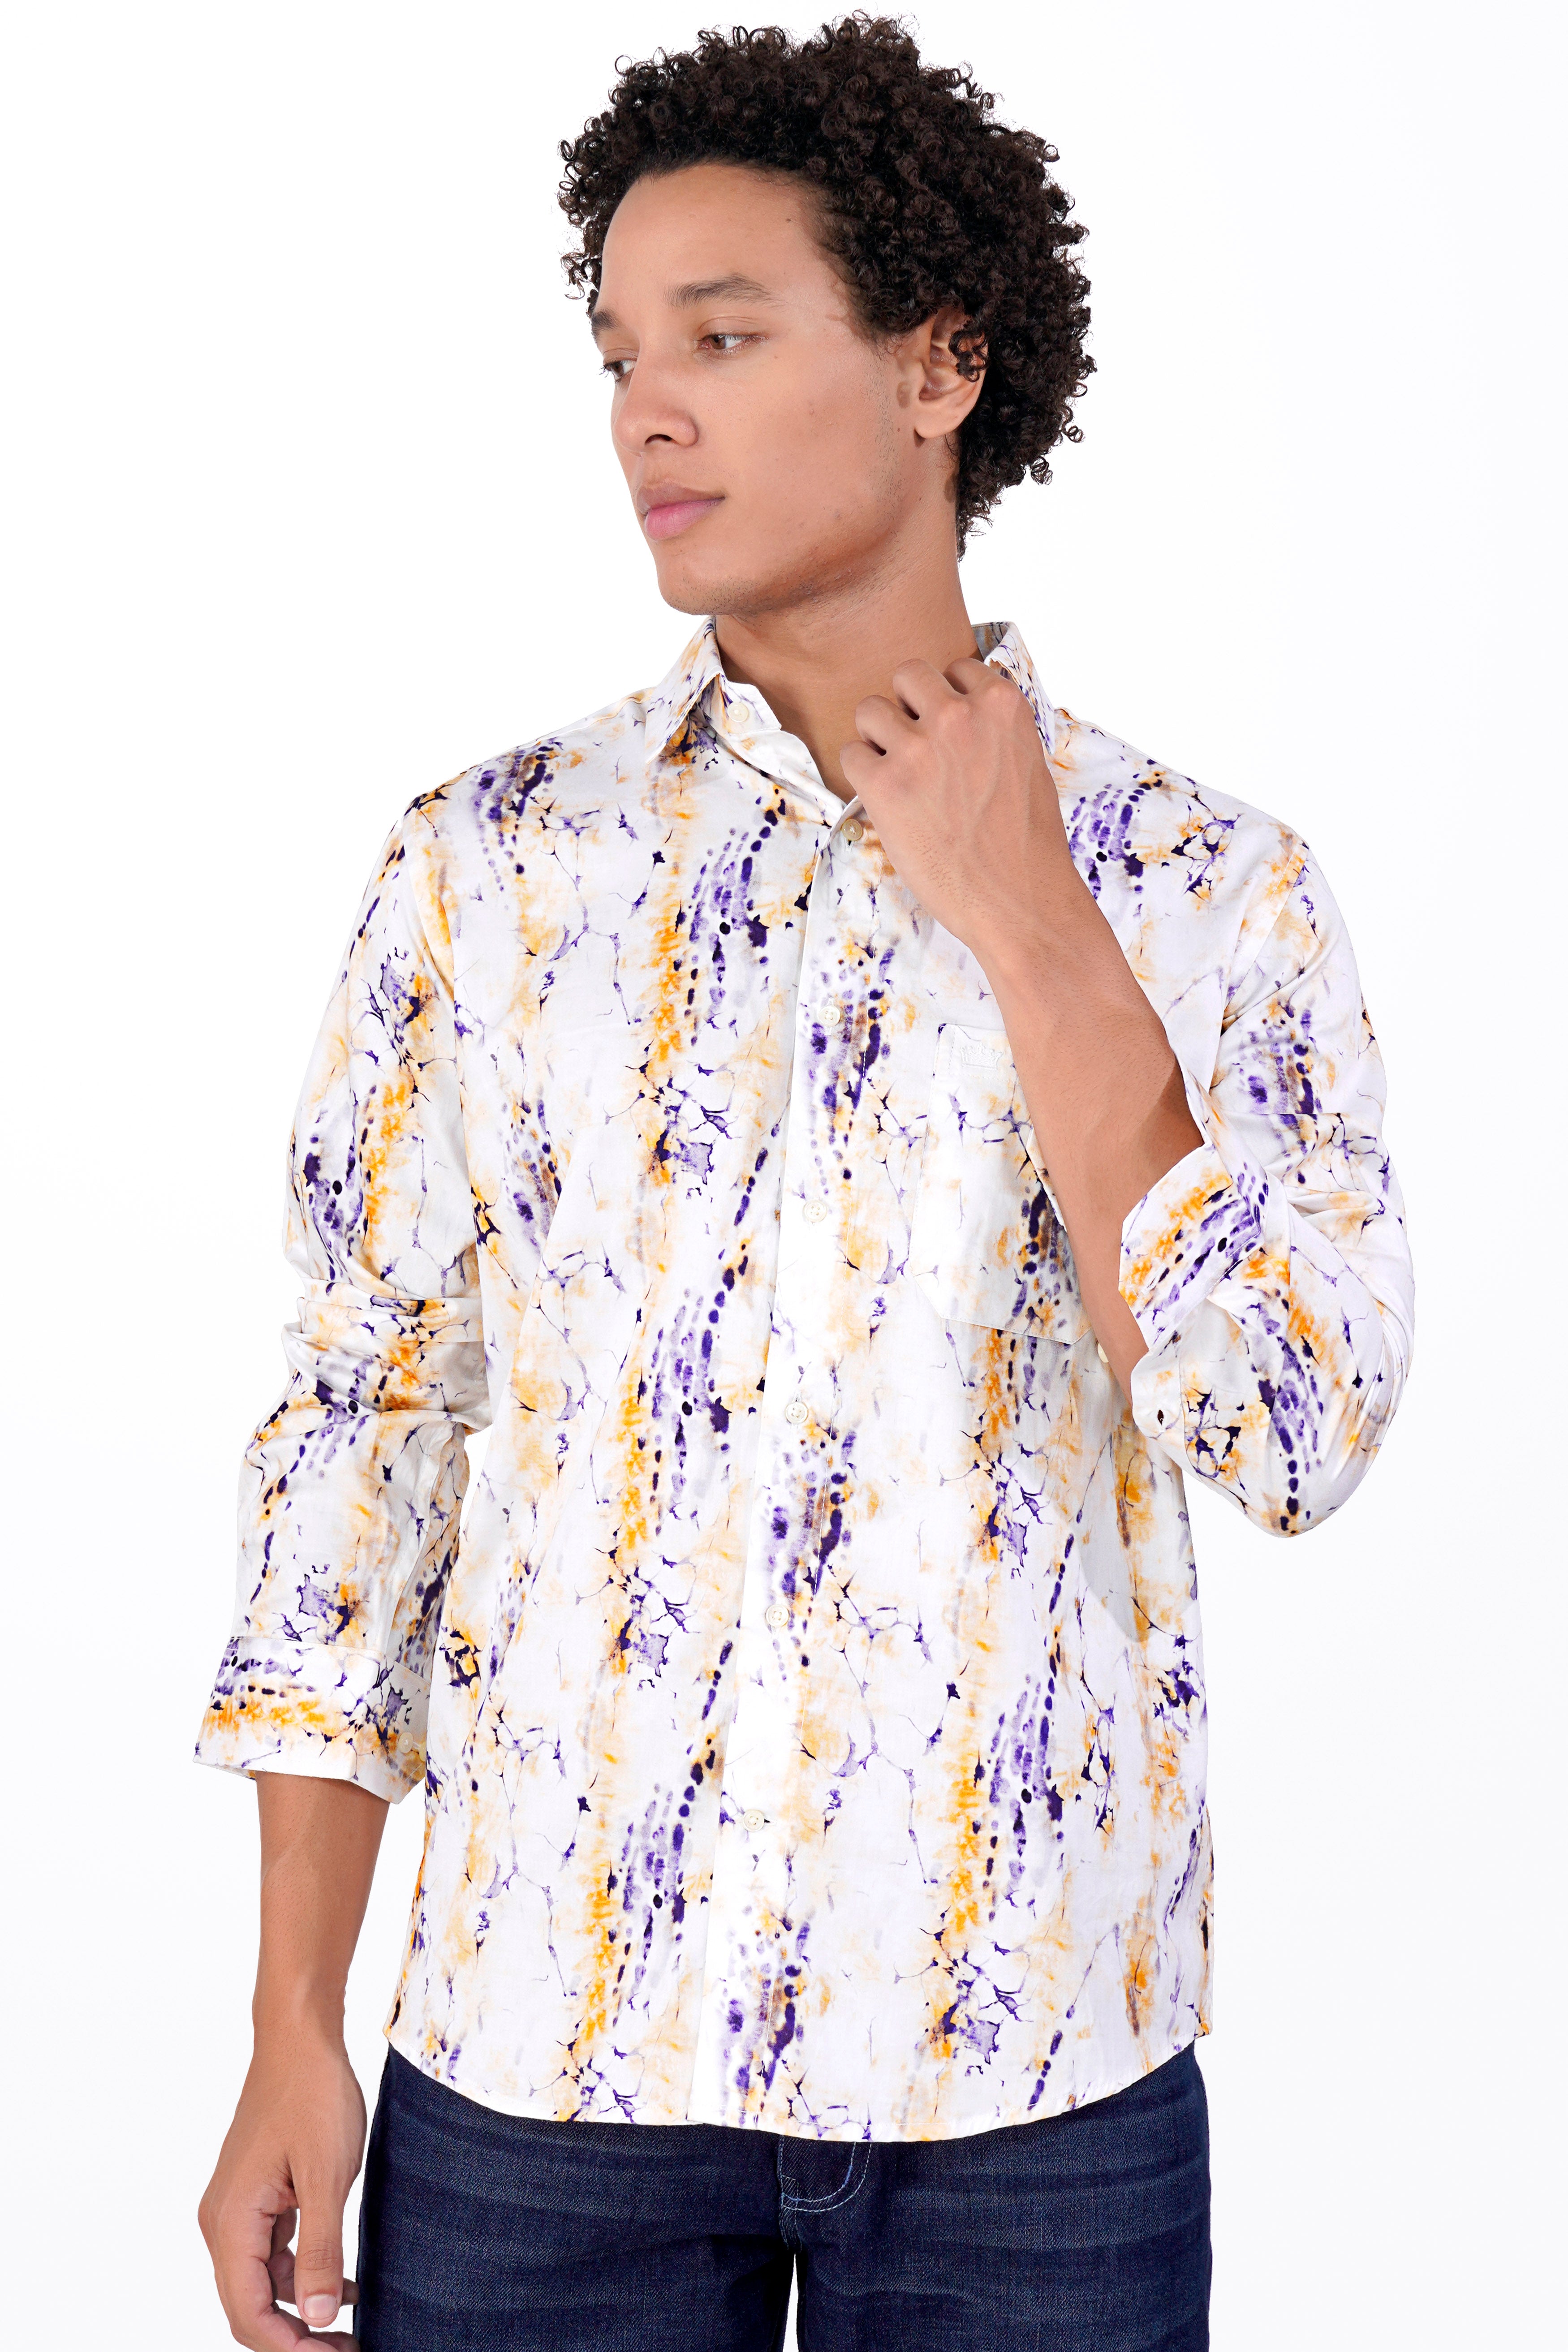 Bright White with Dijon Brown and Minsk Blue Printed Super Soft Premium Cotton Shirt